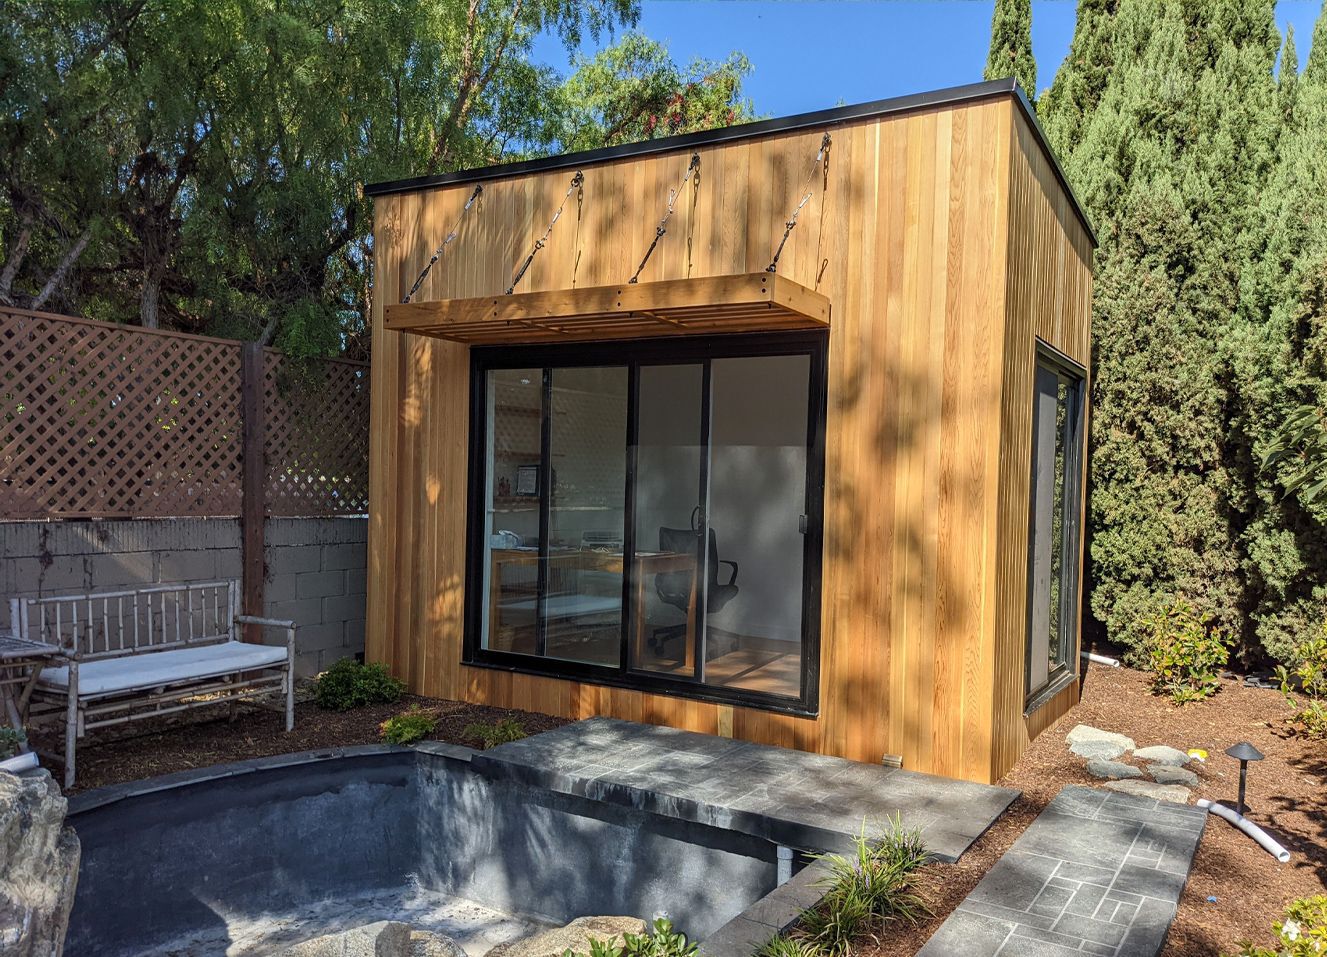 Front view of 8’x14' Quadra Home Studio located in Torrance, California – Summerwood Products